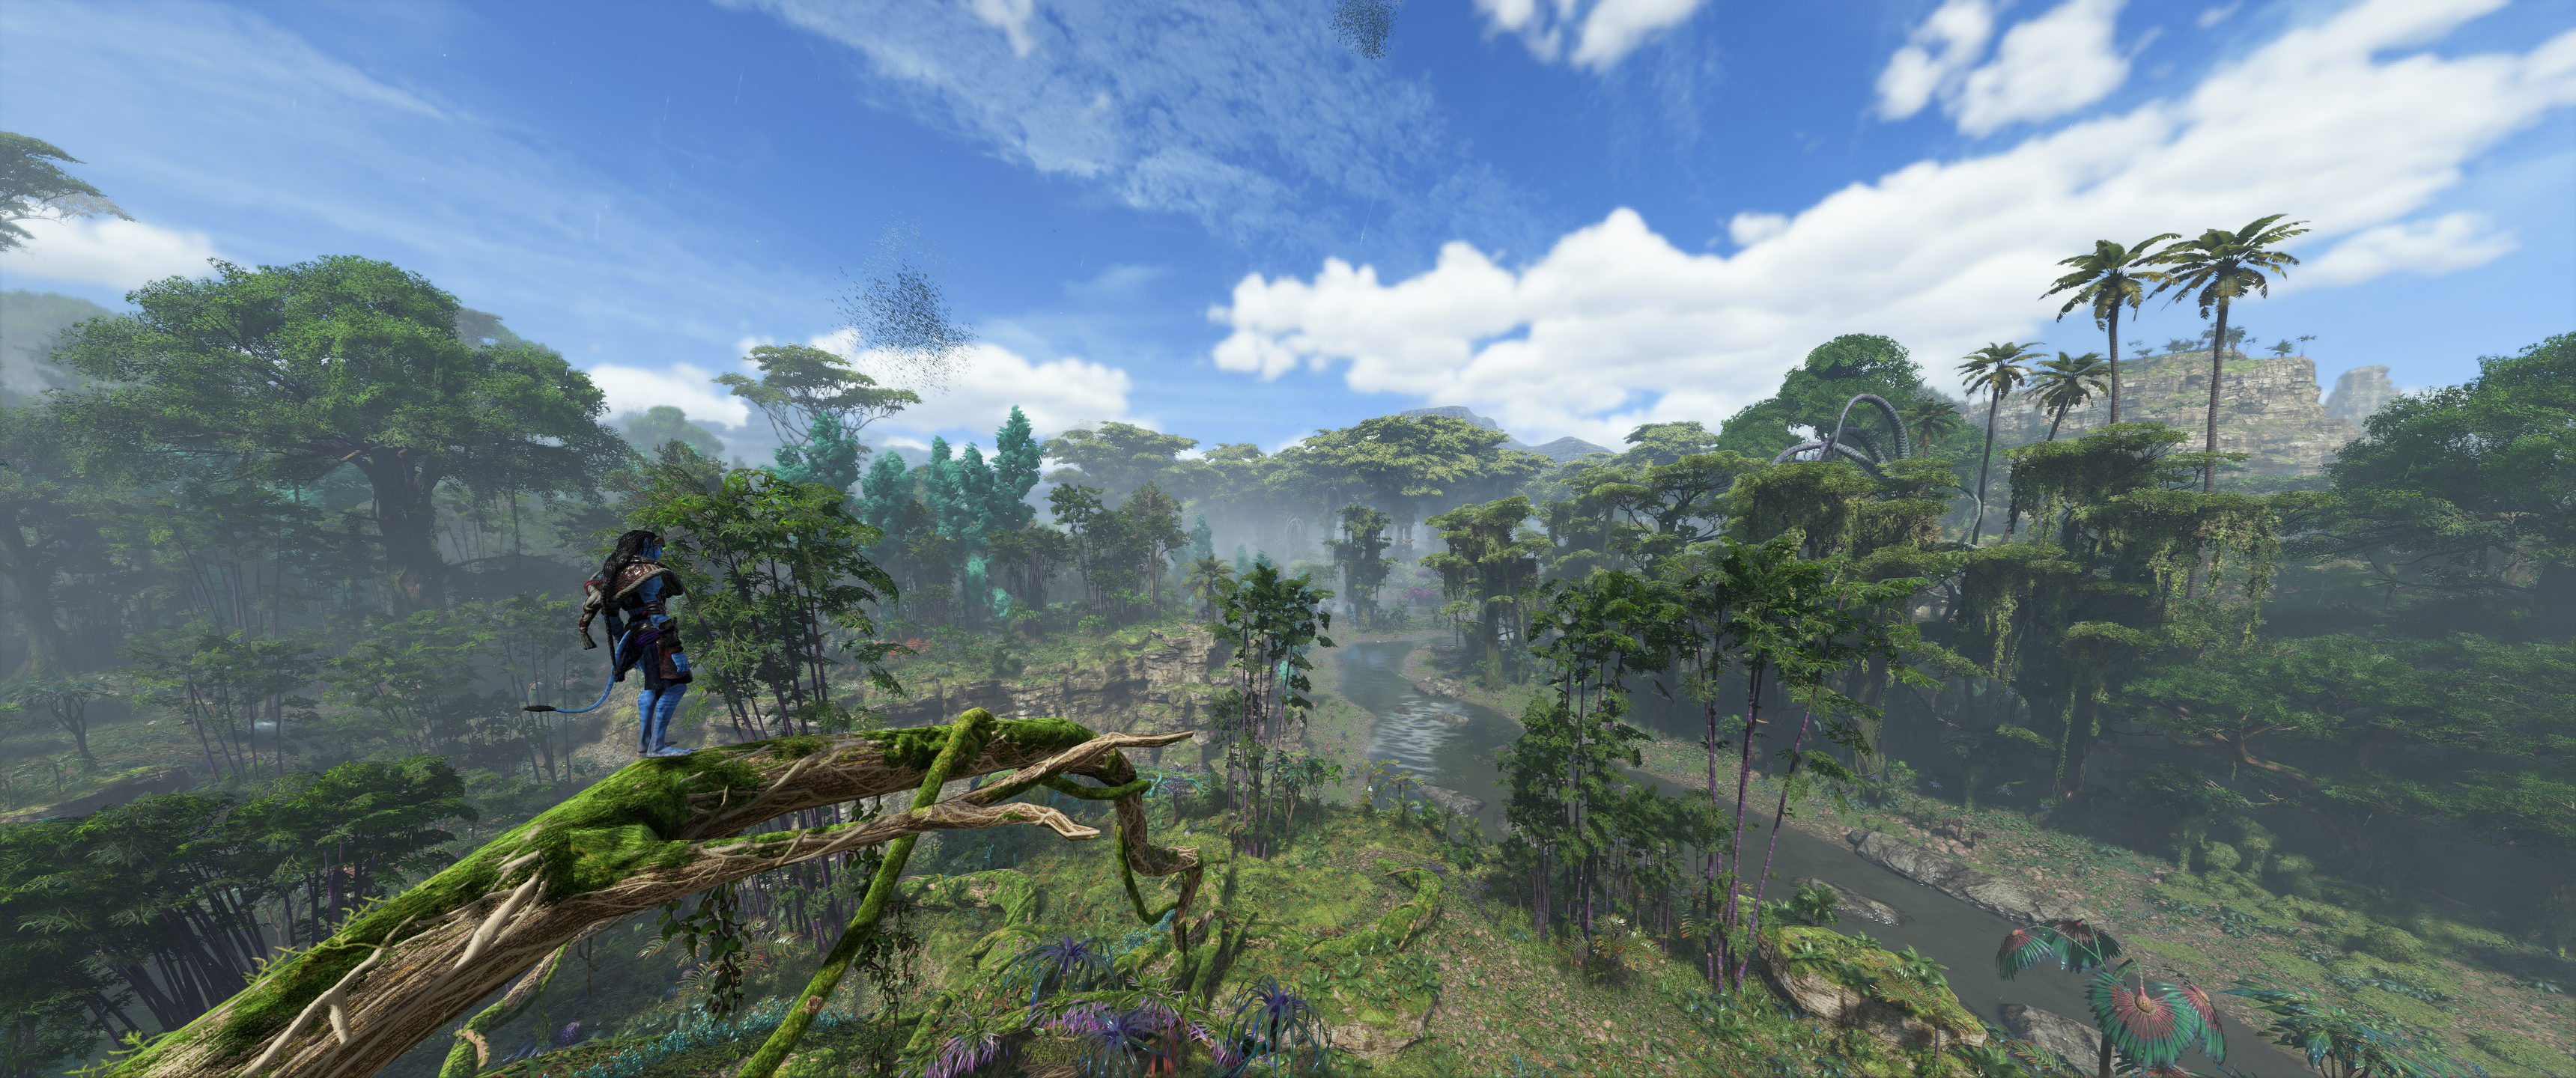 General 3440x1440 Avatar: Frontiers of Pandora Ubisoft video games Avatar landscape video game characters CGI video game art screen shot palm trees standing sky clouds nature blue skin